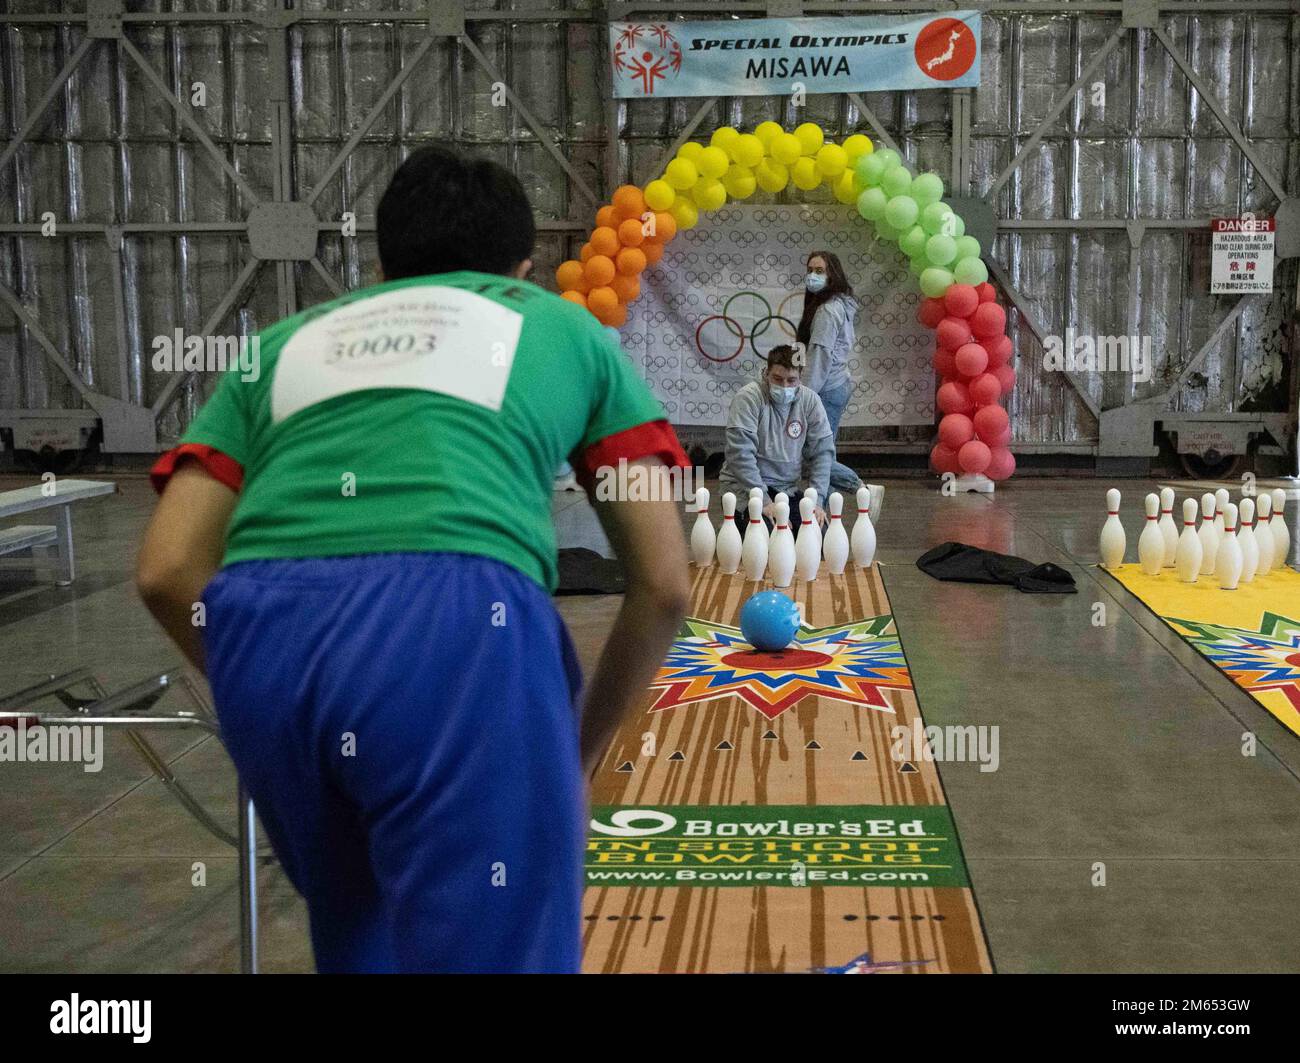 An athlete of the 2022 Misawa Special Olympics rolls a bowling ball during one of the games at Misawa Air Base, Japan, April 2, 2022. This marks the 34th year that Misawa held the Special Olympics. Stock Photo